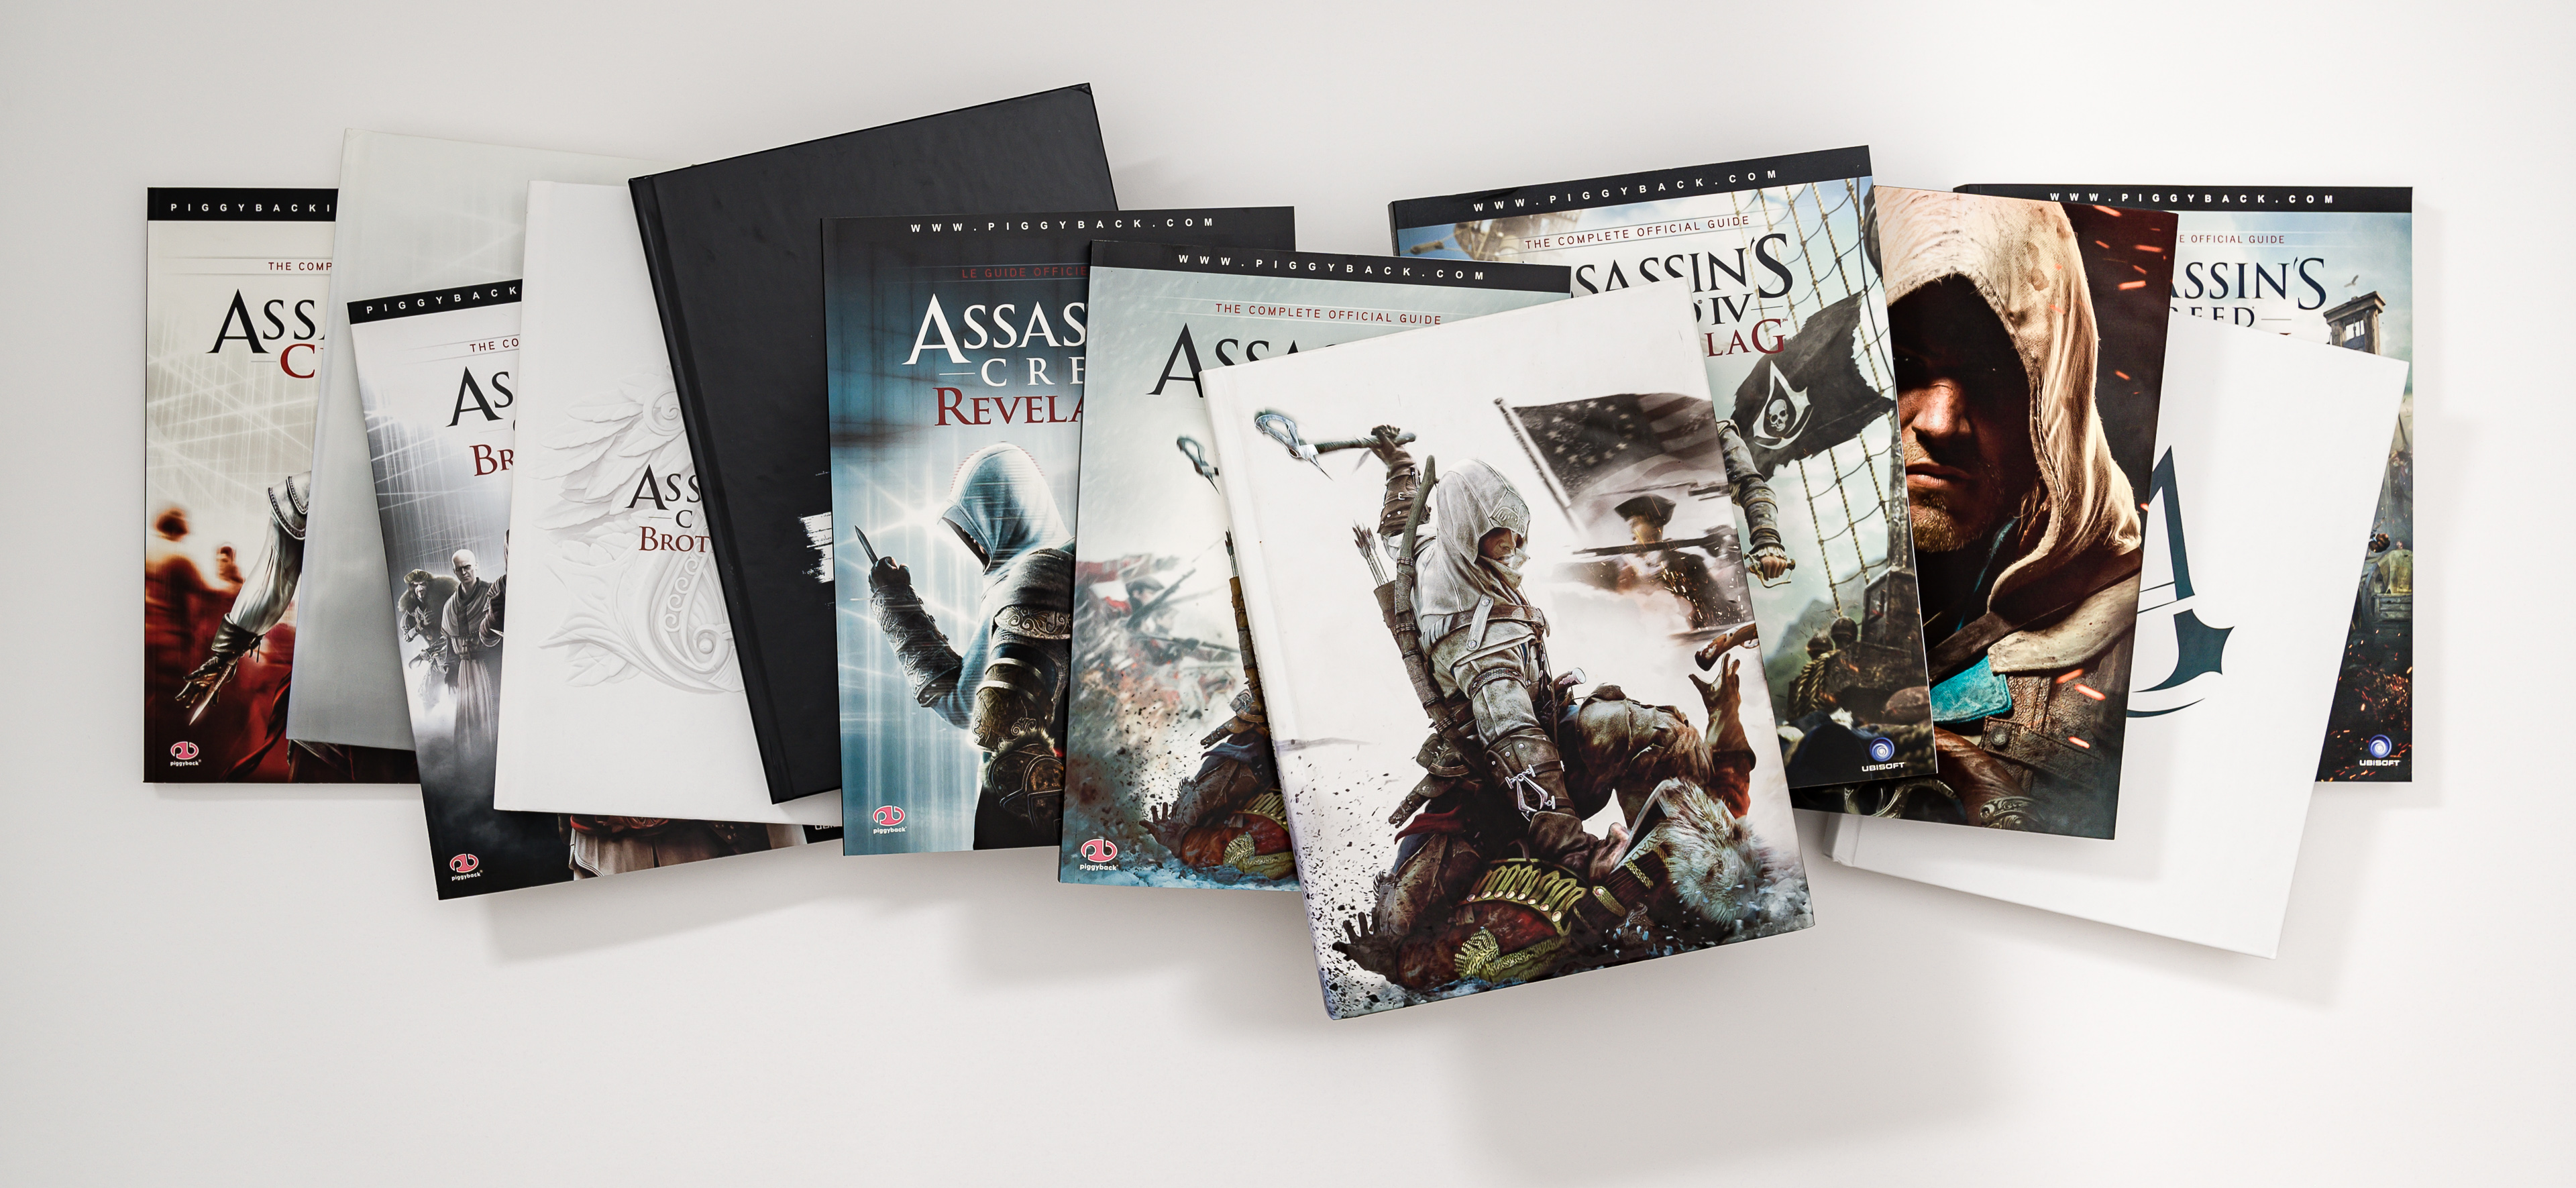 File:Assassin's Creed II The Complete Official Guide Collector's